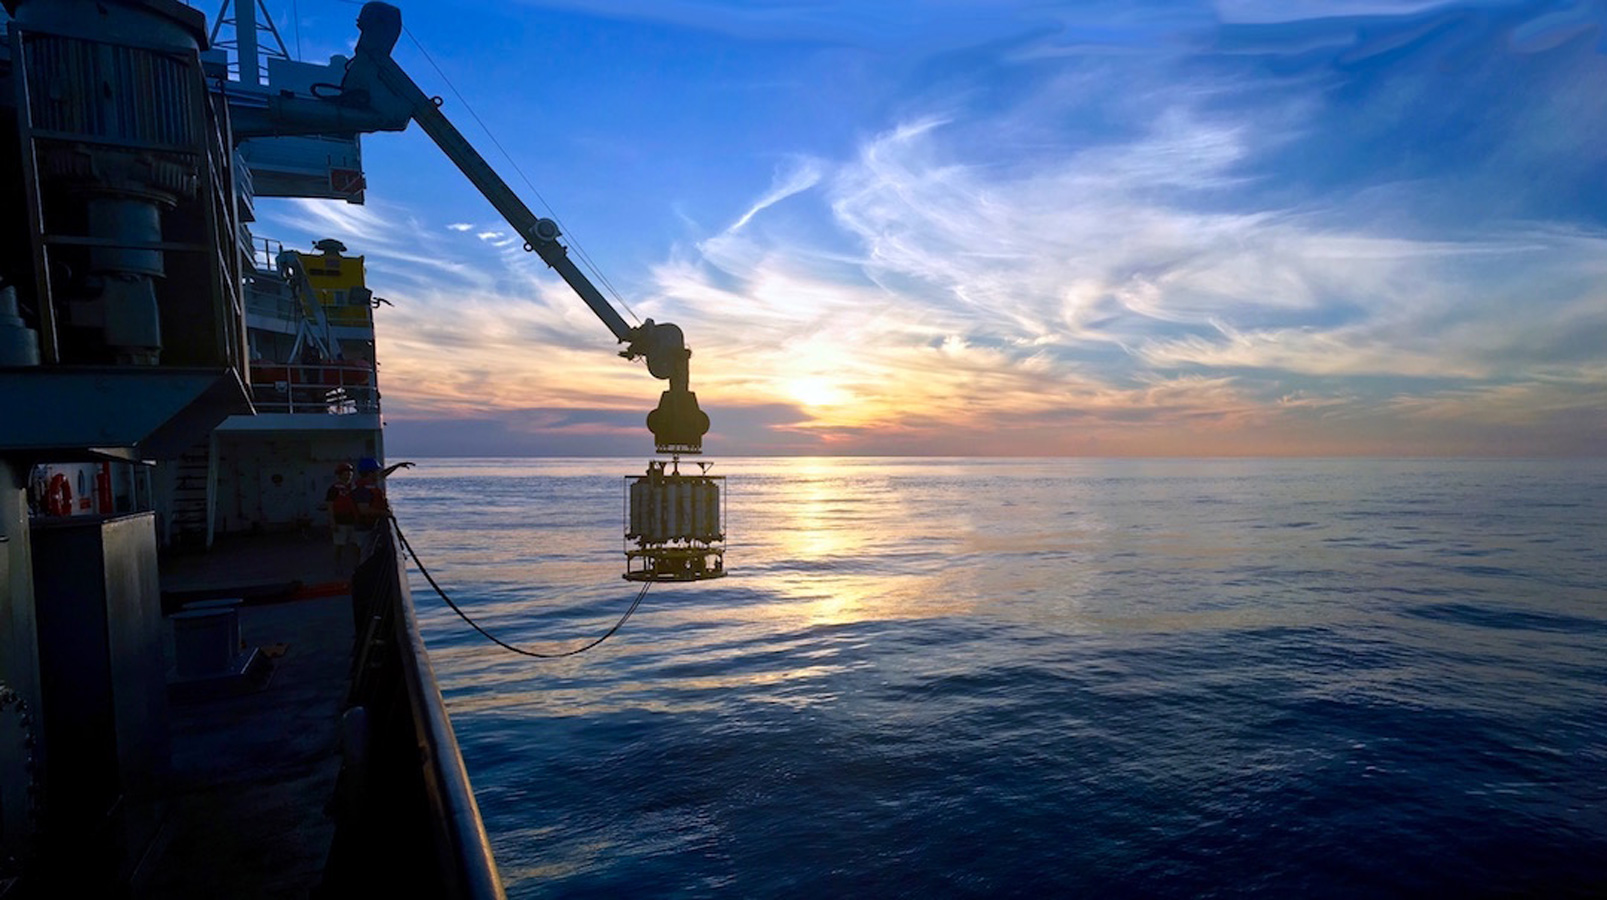 Sunset photo: The sun dips to the surface of the glassy blue ocean with few white clusters of clouds. The ship is taken fromthe side of a vessel as we can see the boat's hull along the left edge of the photo, a niskin bottle sampler being lowered into the ocean over the side almost next to the sun.